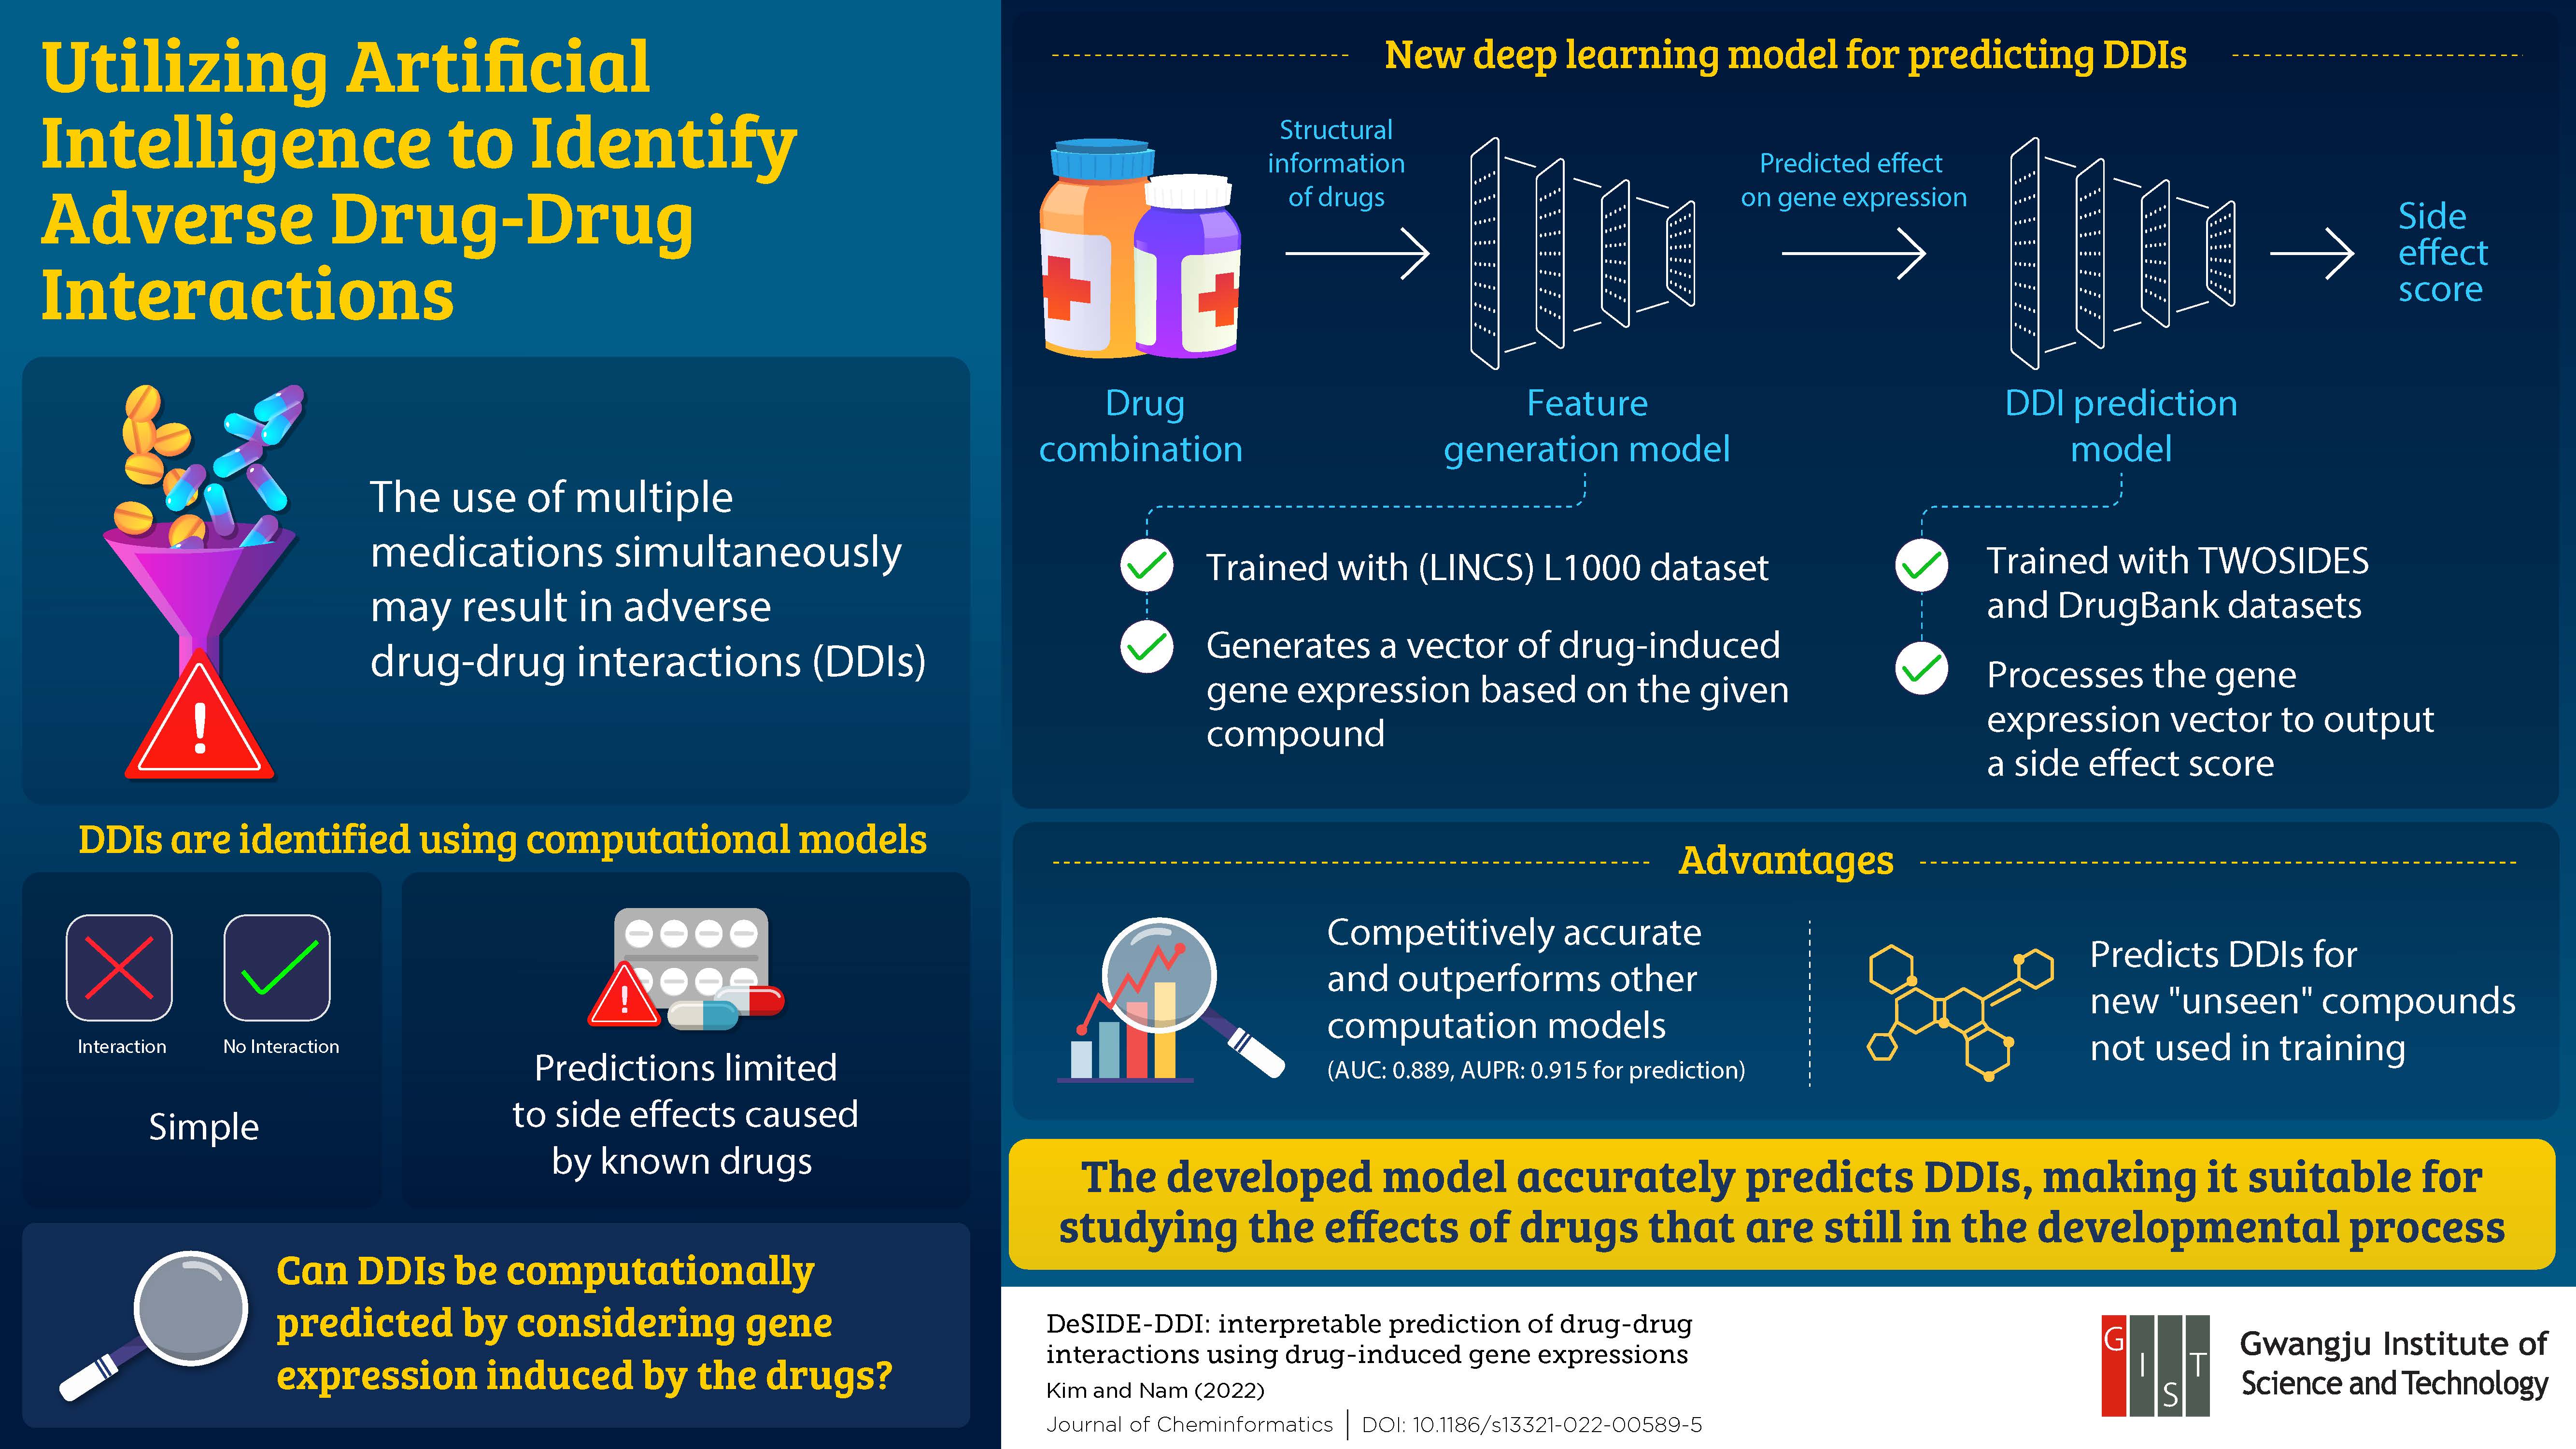 Researchers at the Gwangju Institute of Science and Technology Develop Deep Learning Model to Predict Adverse Drug-Drug Interactions 이미지